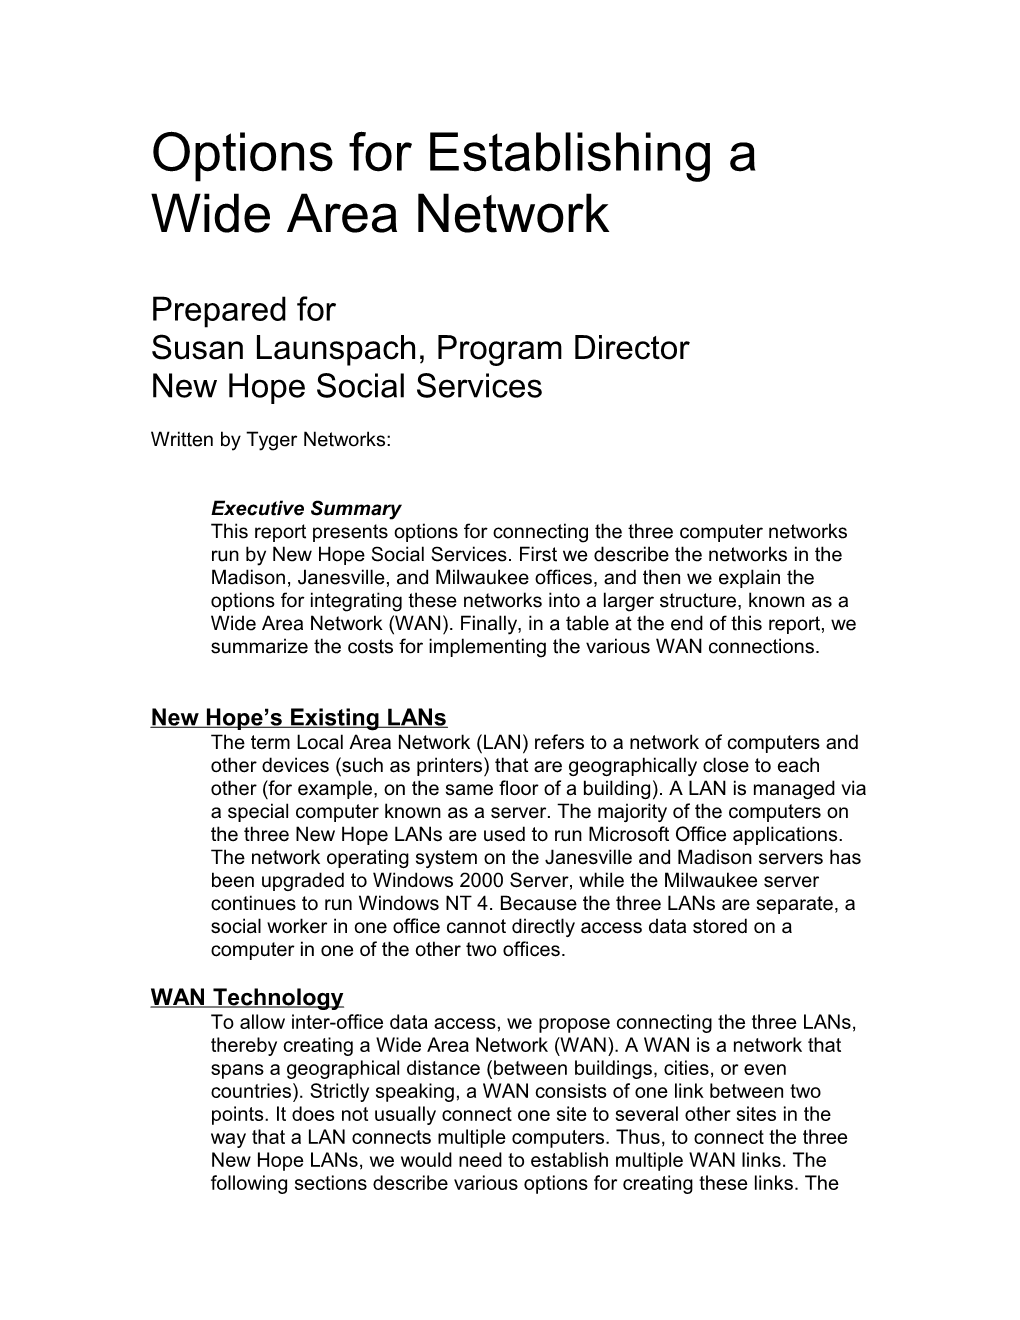 Options for Establishing a Wide Area Network